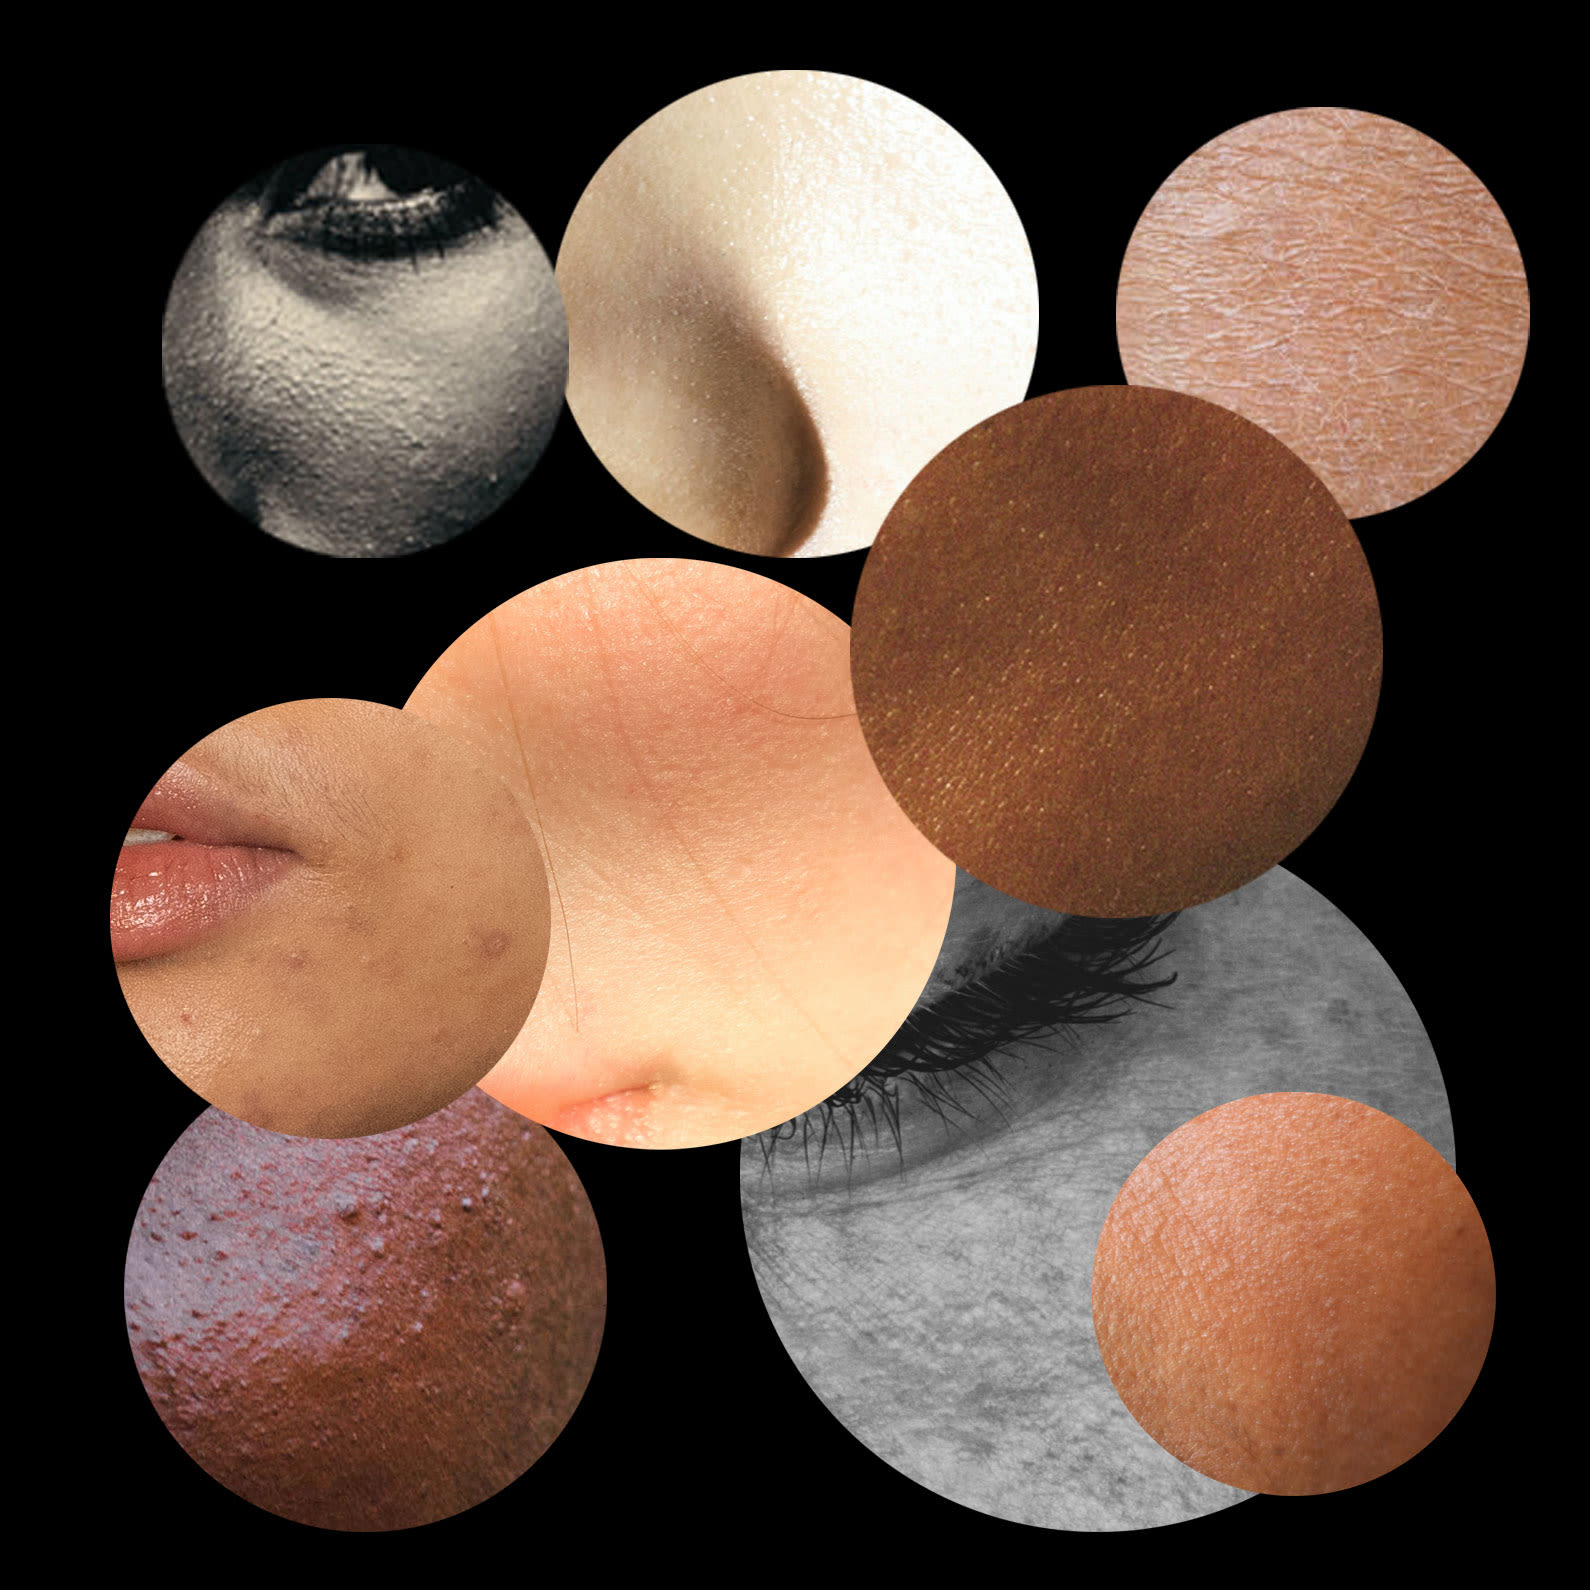 Circles showing many different types of skin